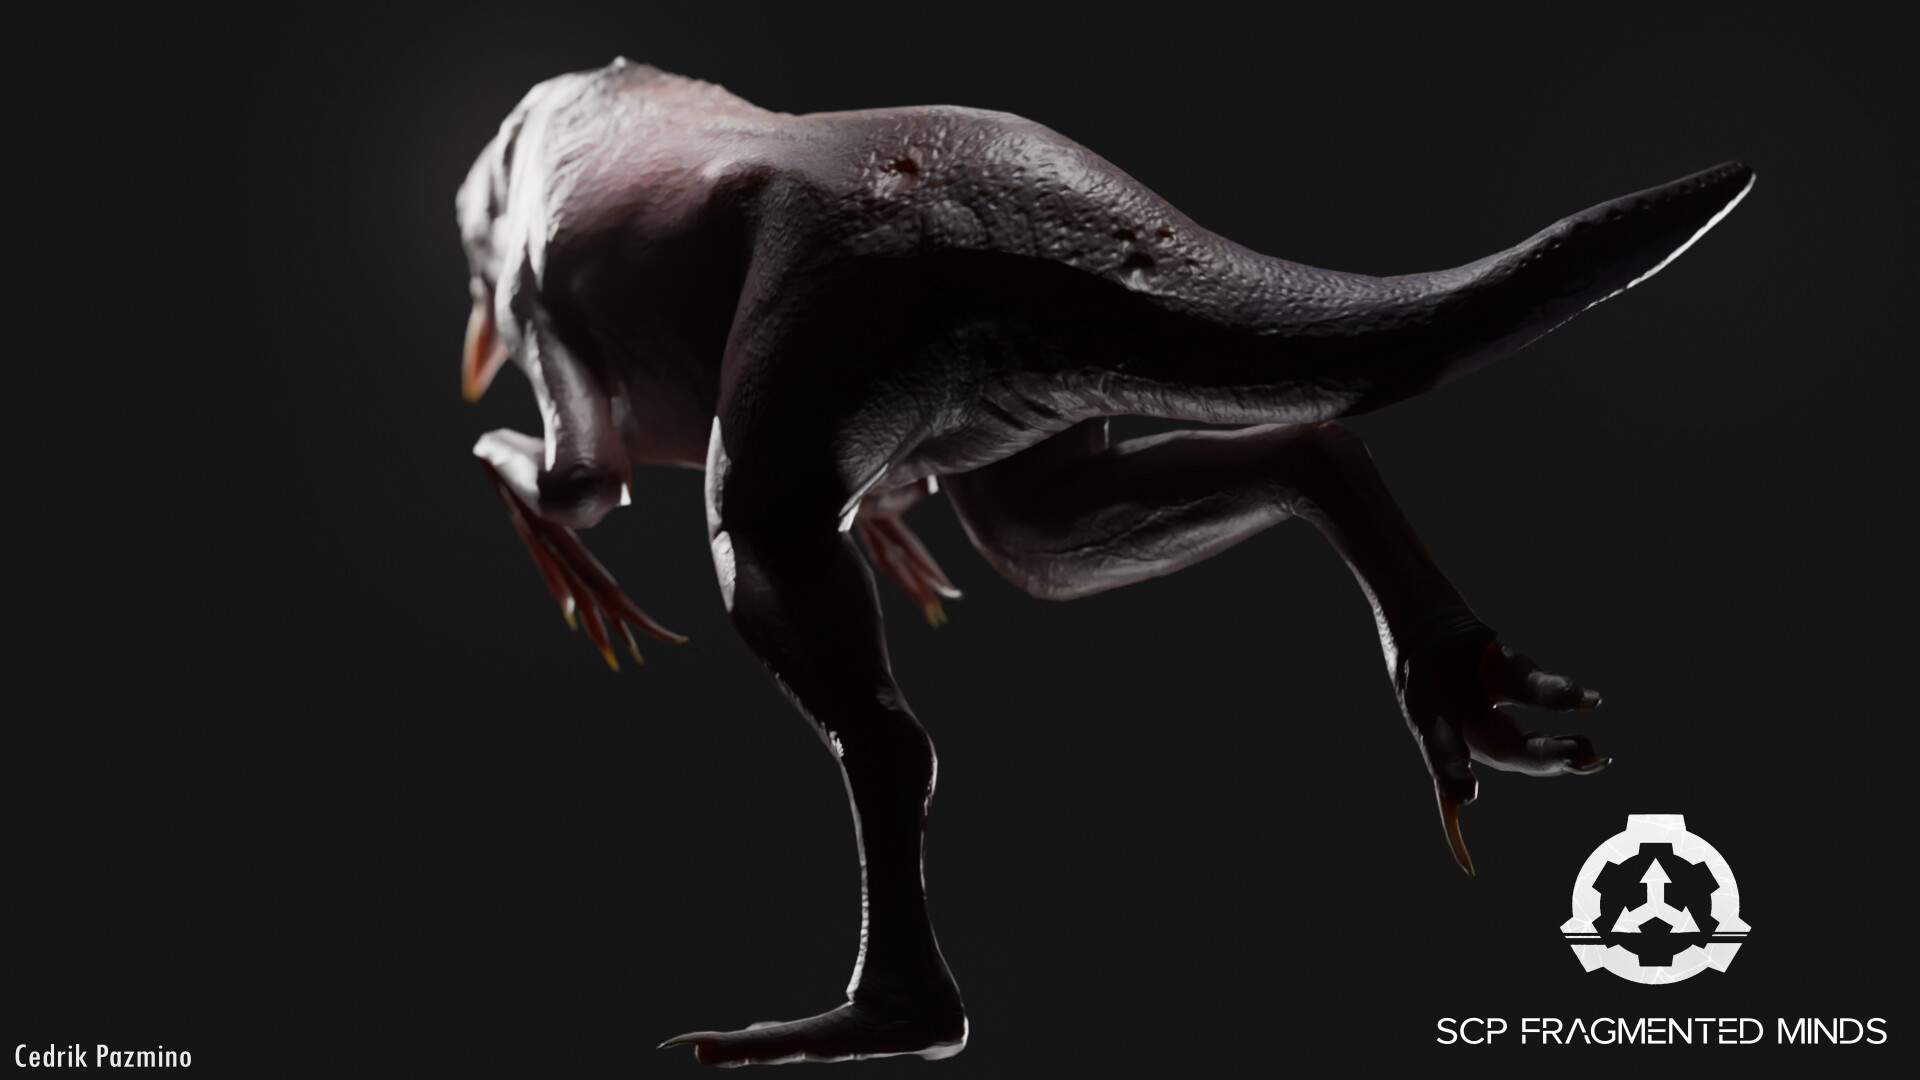 ArtStation - SCP: Fragmented Minds - SCP-682